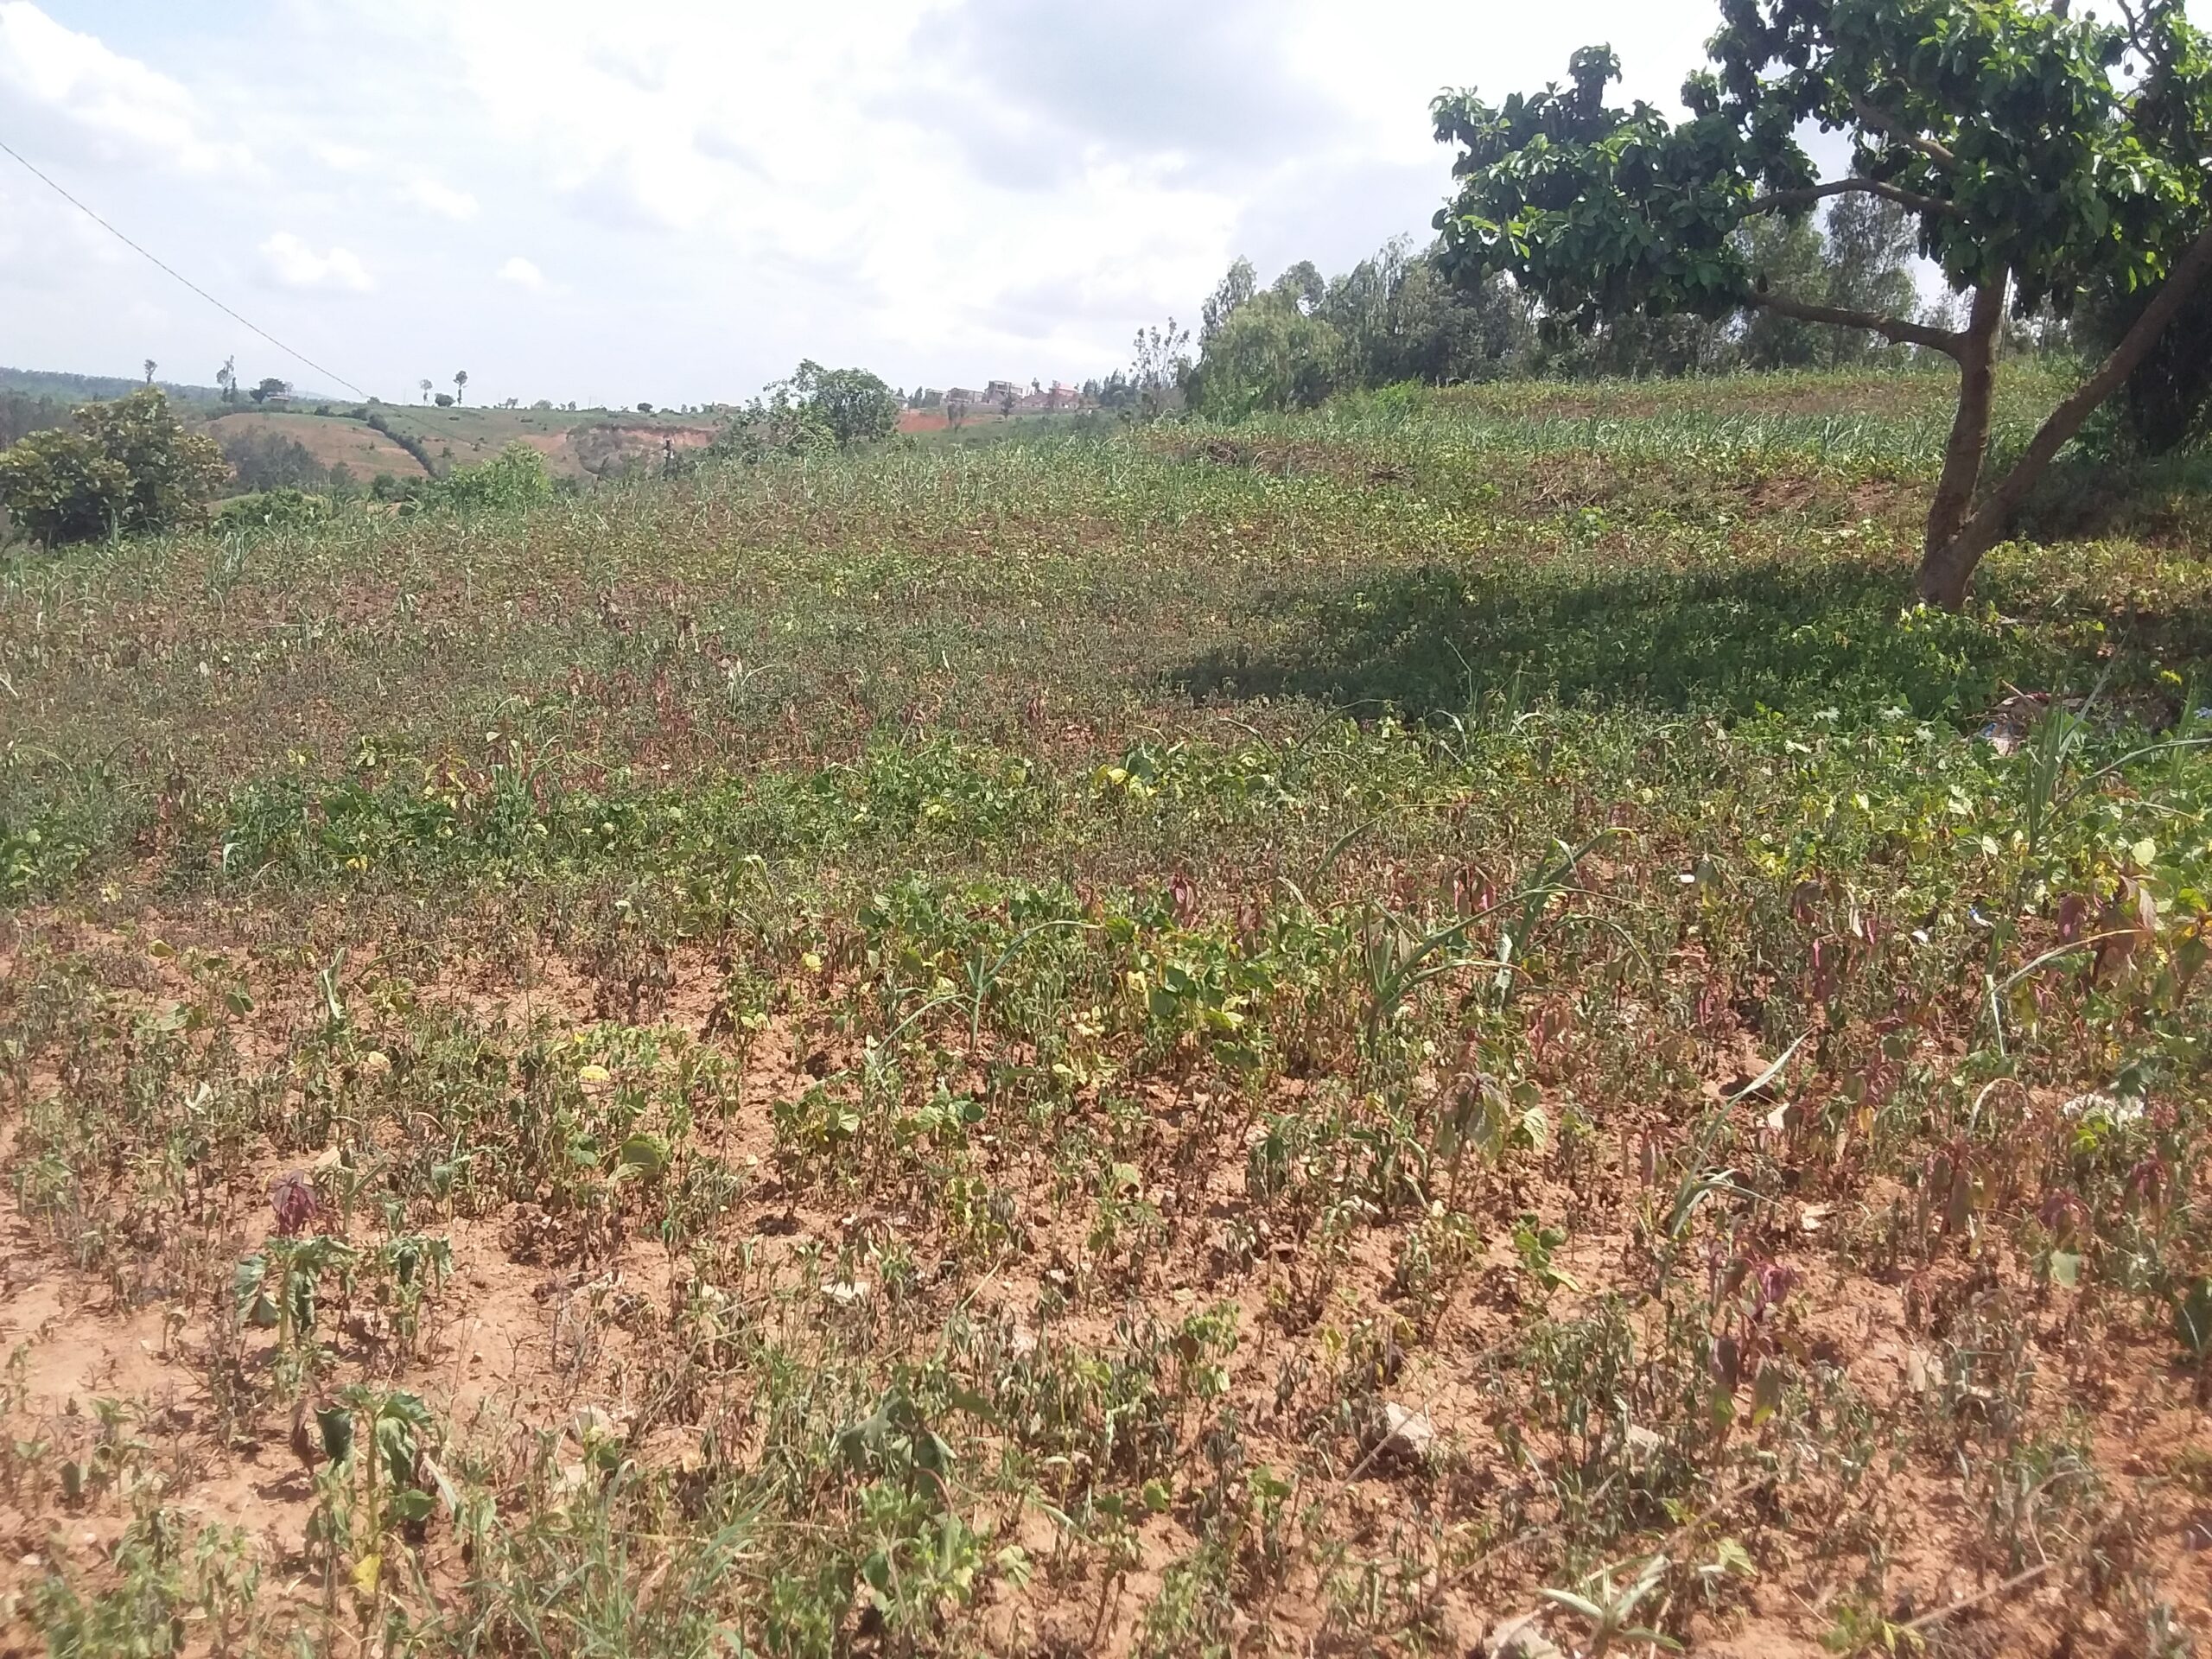 A view of a dried beans plantation in Ntarama in Bugesera District. In December 2021, the government embarked on distributing food relief to the needy families mainly in the seven hard hit districts of Bugesera, Gatsibo, Kayonza, Kirehe, Ngoma, Nyagatare and Rwamagana. File